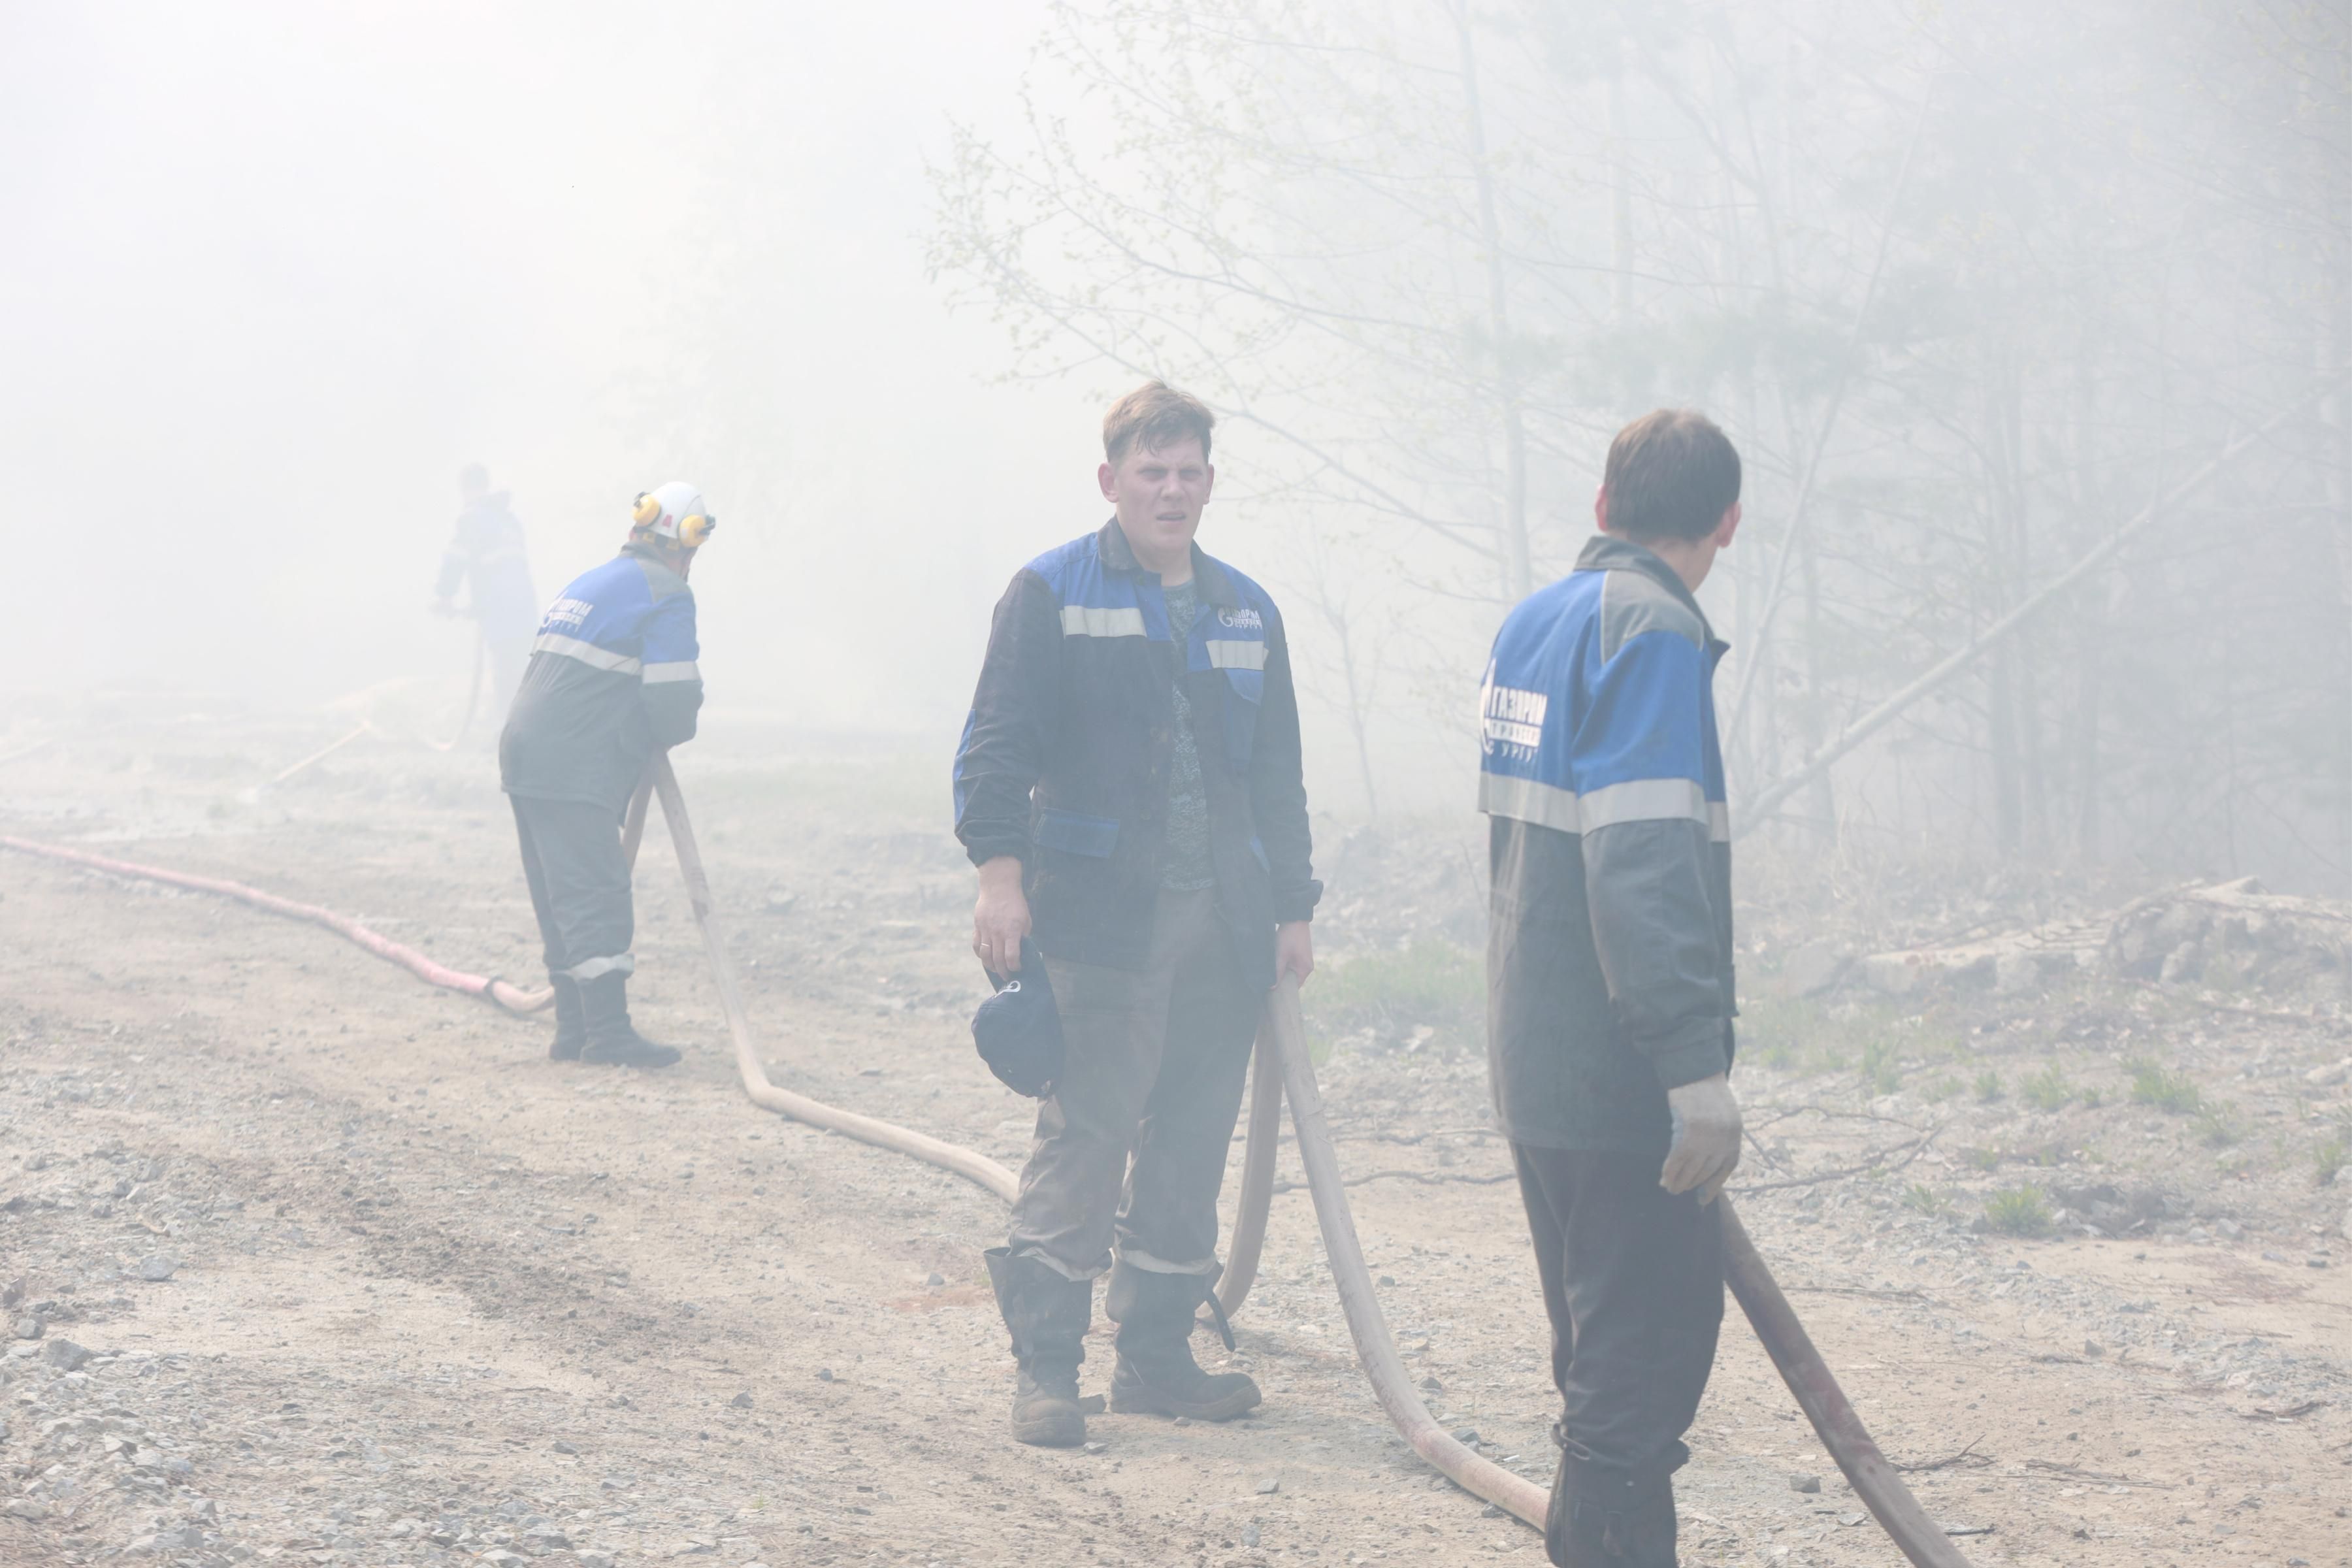 Workers battle forest fires in Siberia